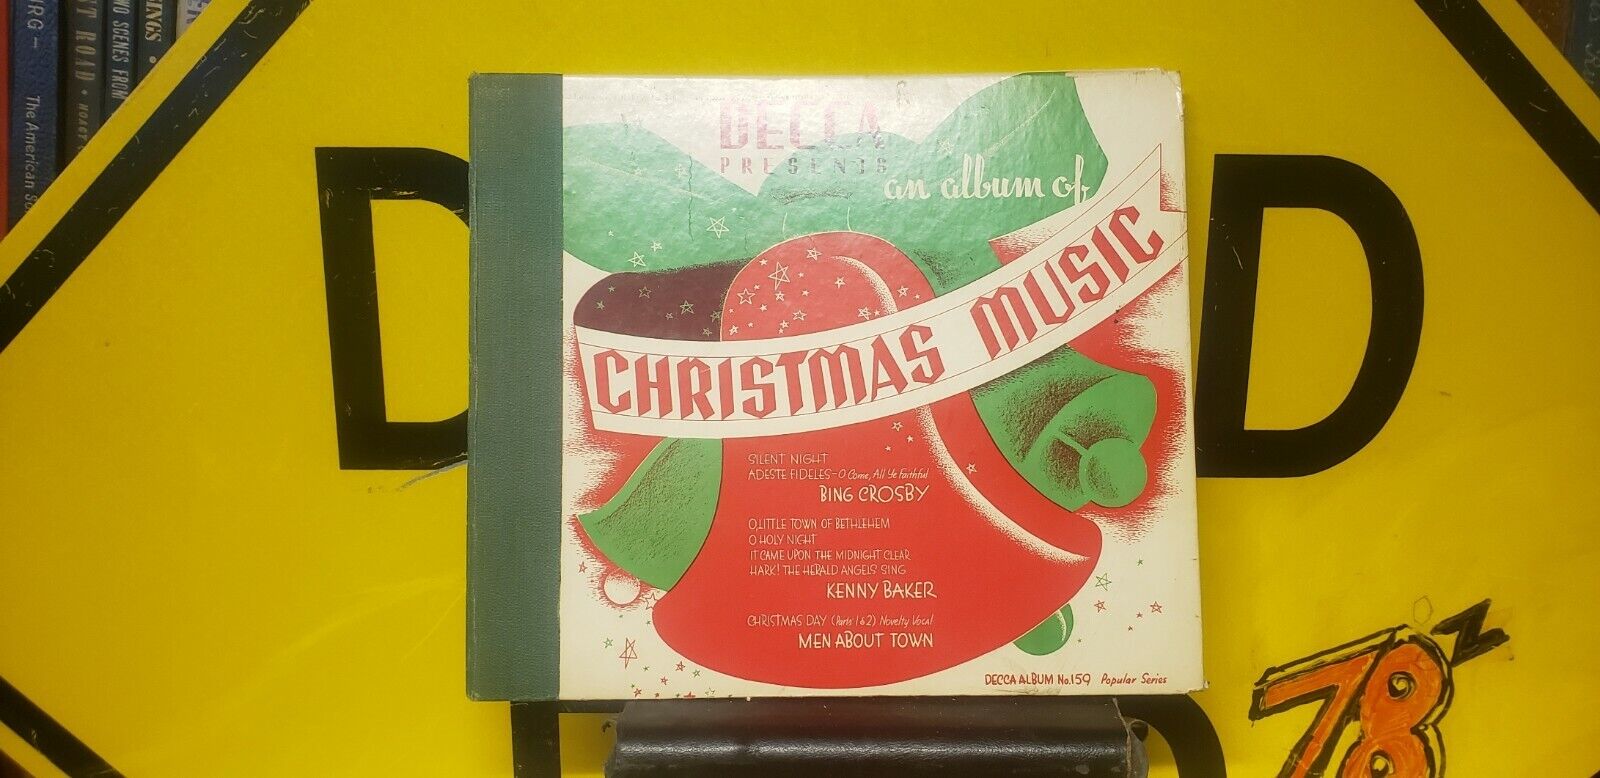 78 Rpm An Album Of Christmas Music, Bing Crosby, Kenny Baker, Men About Town